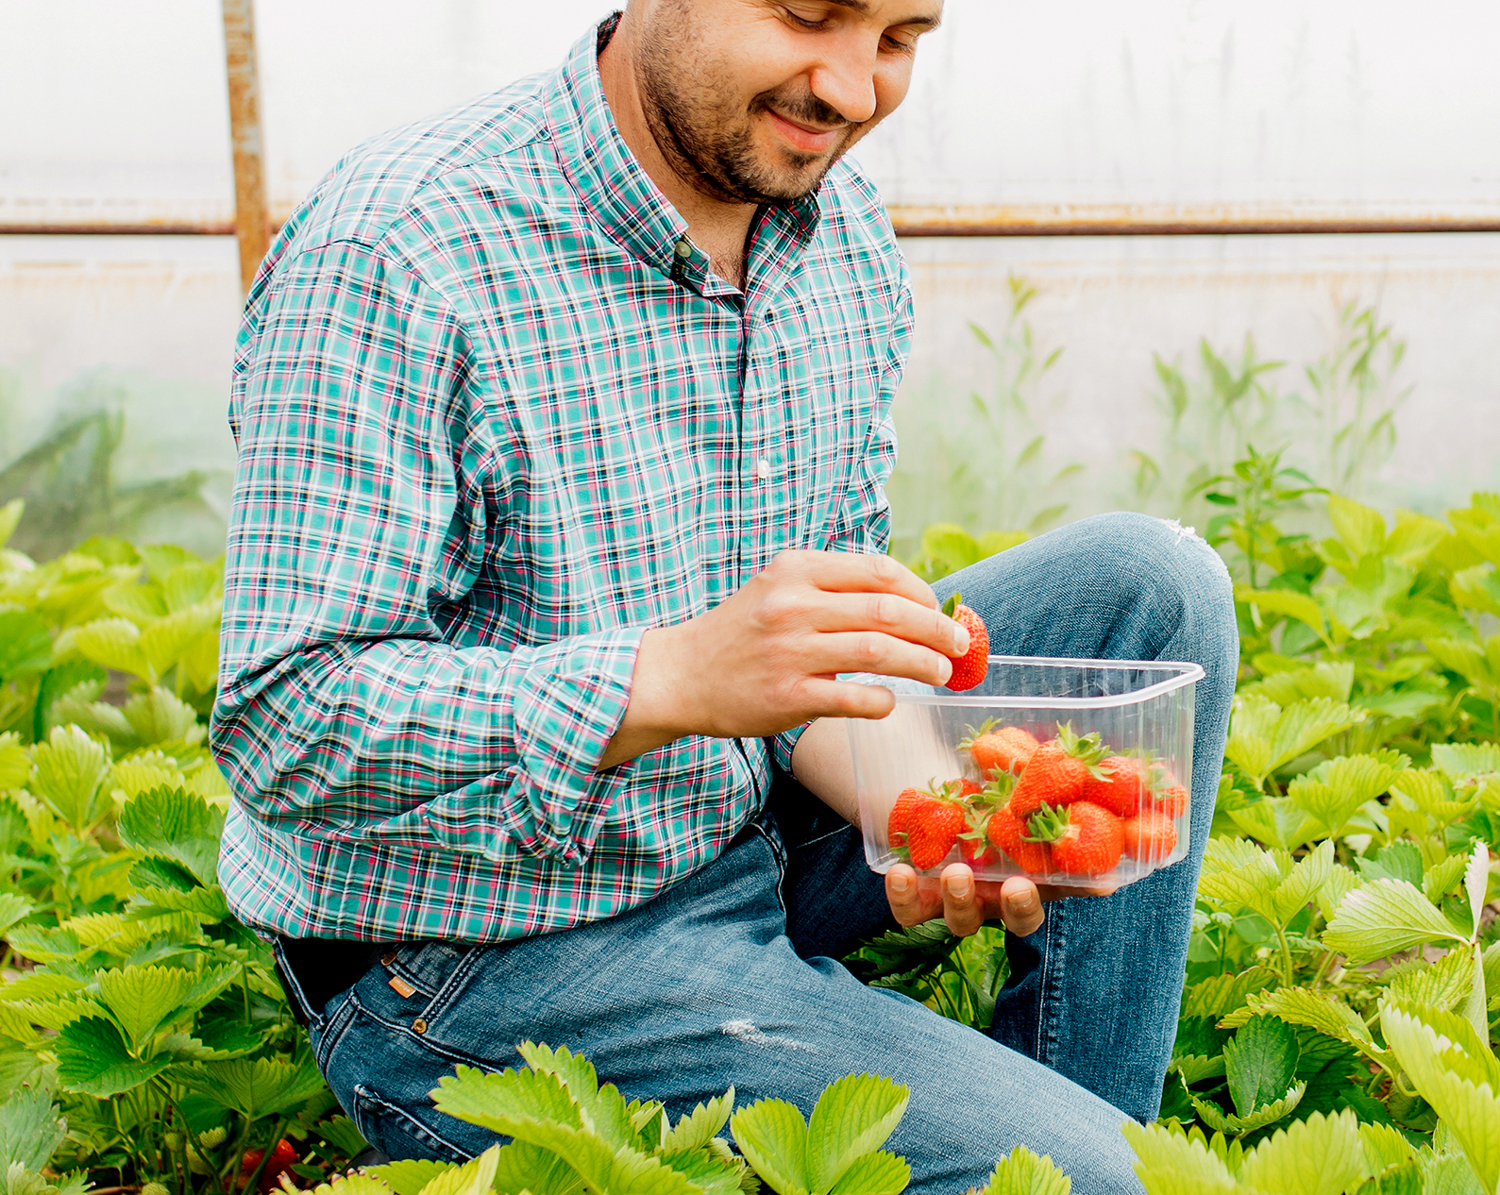 Image of Always Fresh grower holding a container of Strawberries in a field.